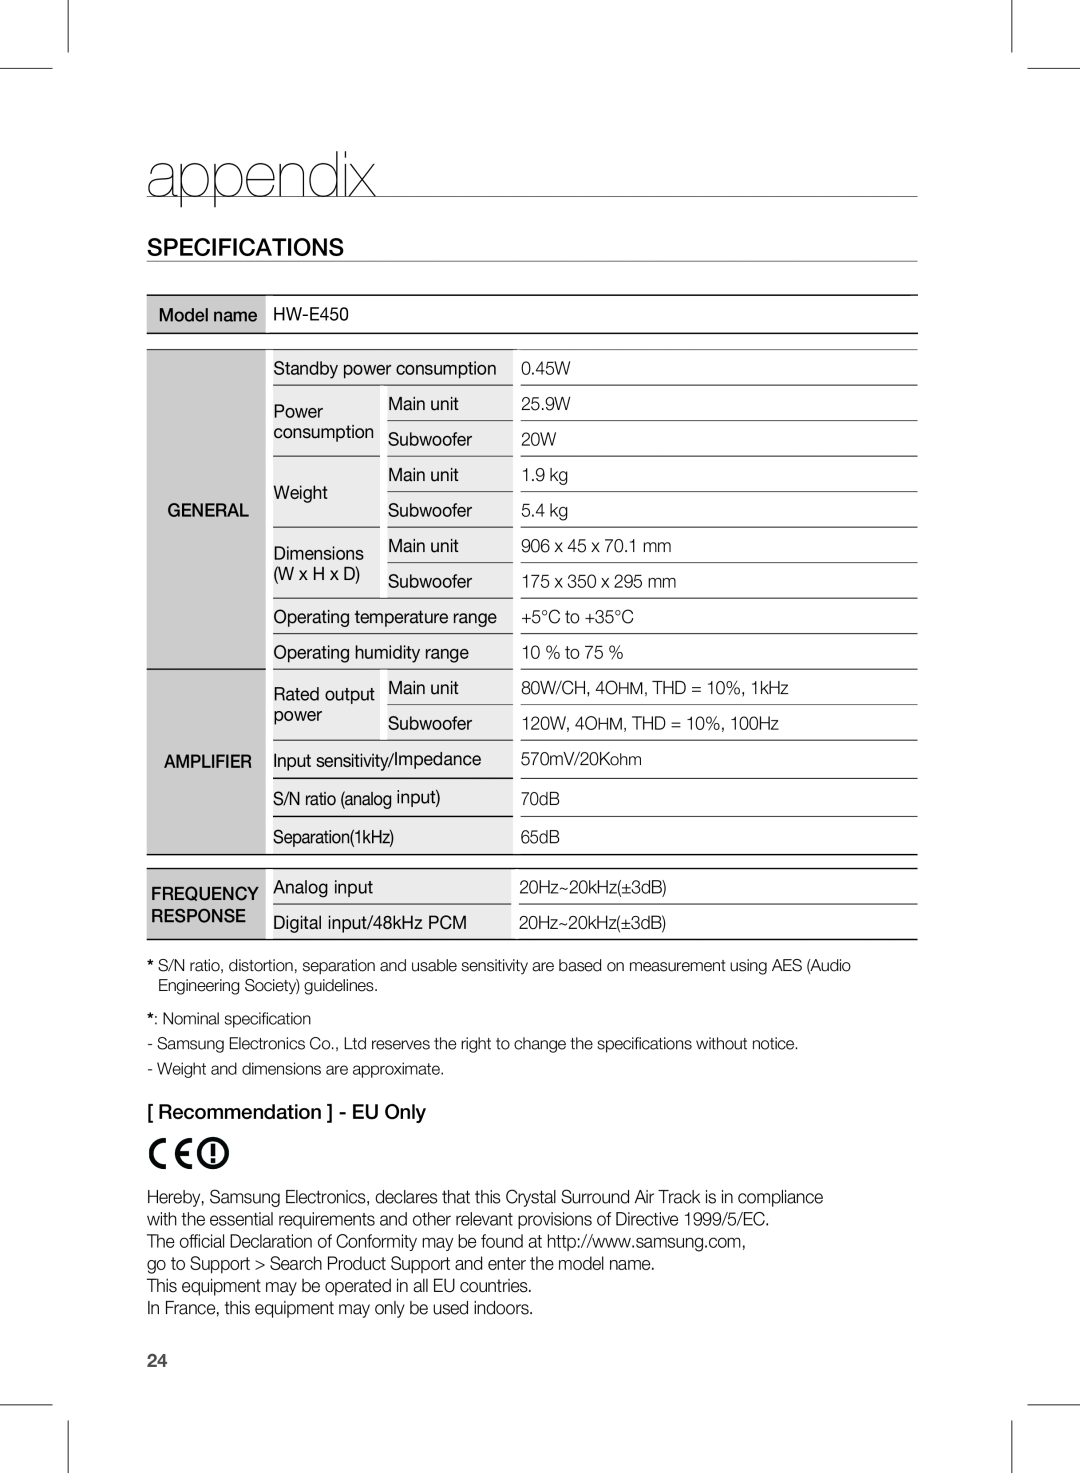 Samsung HW-E450 user manual appendix, Specifications, Recommendation - EU Only 